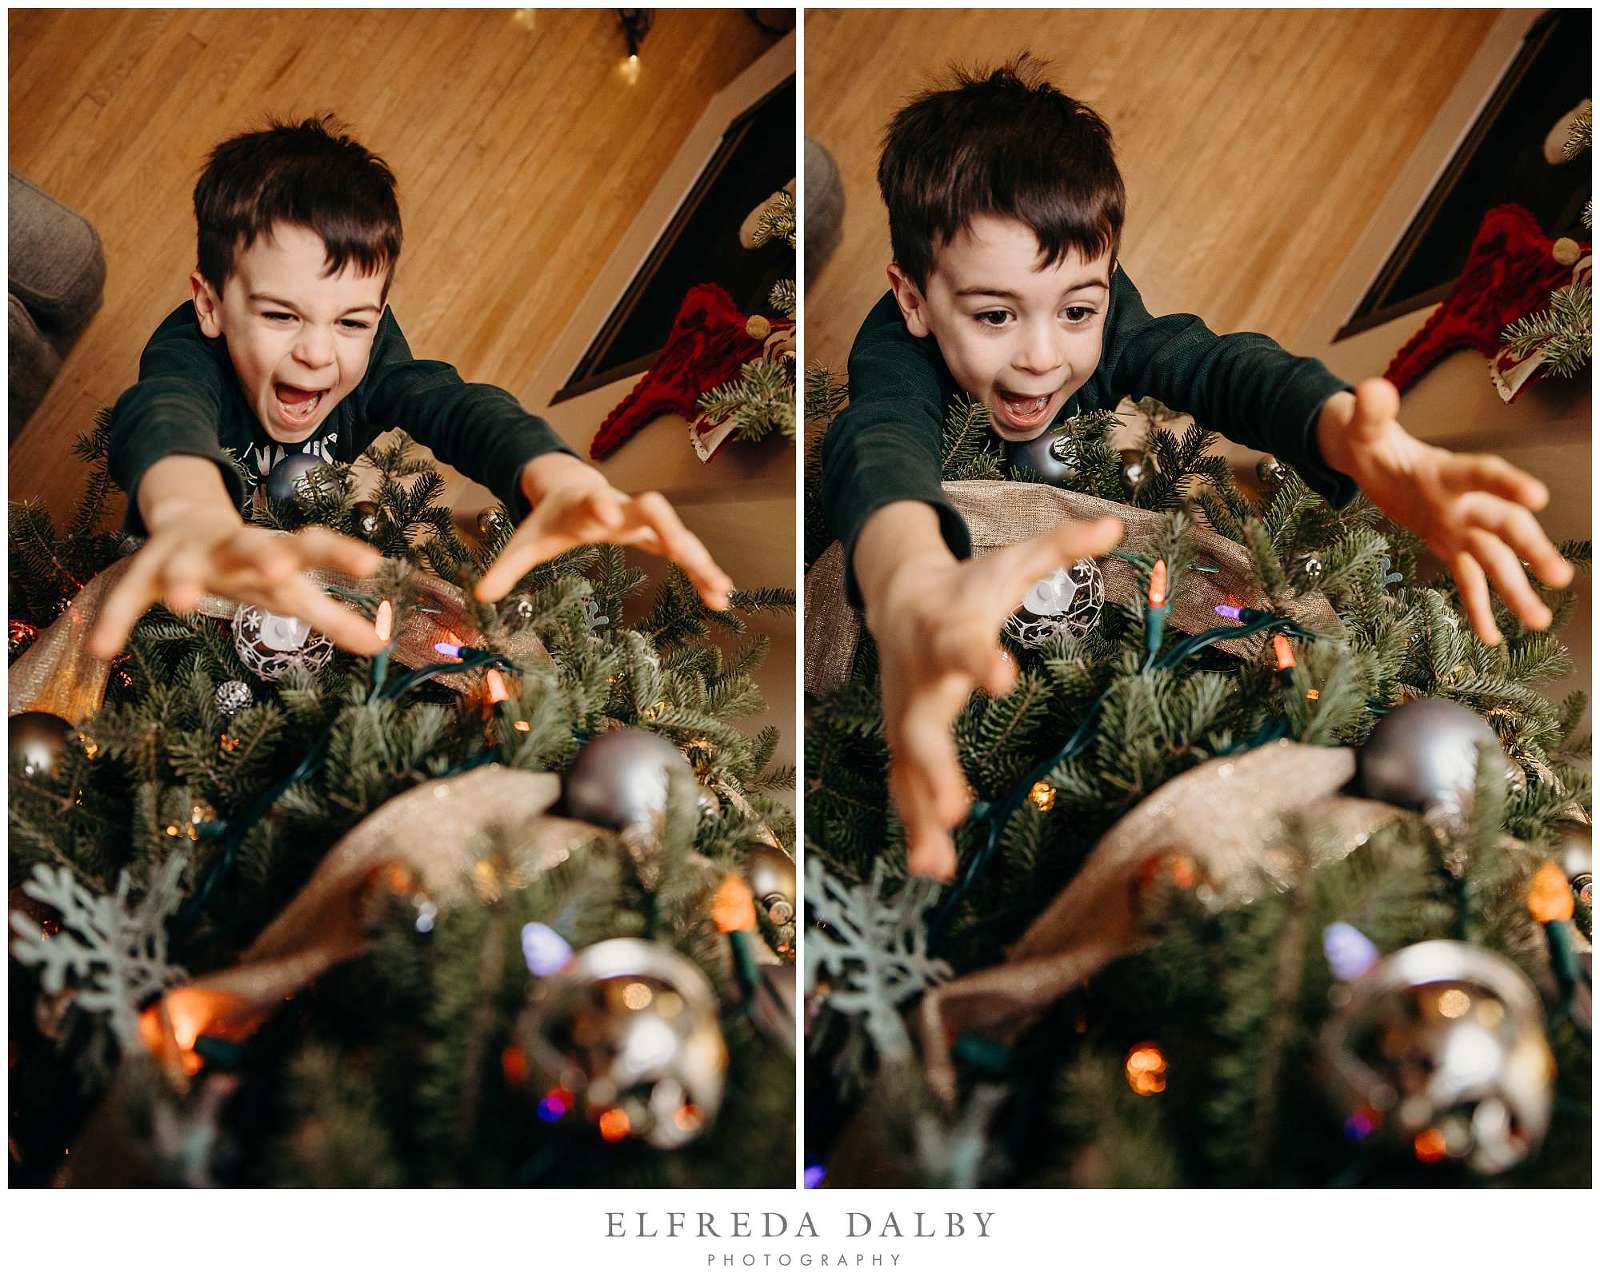 A little boy is trying reach for the star on the Christmas tree